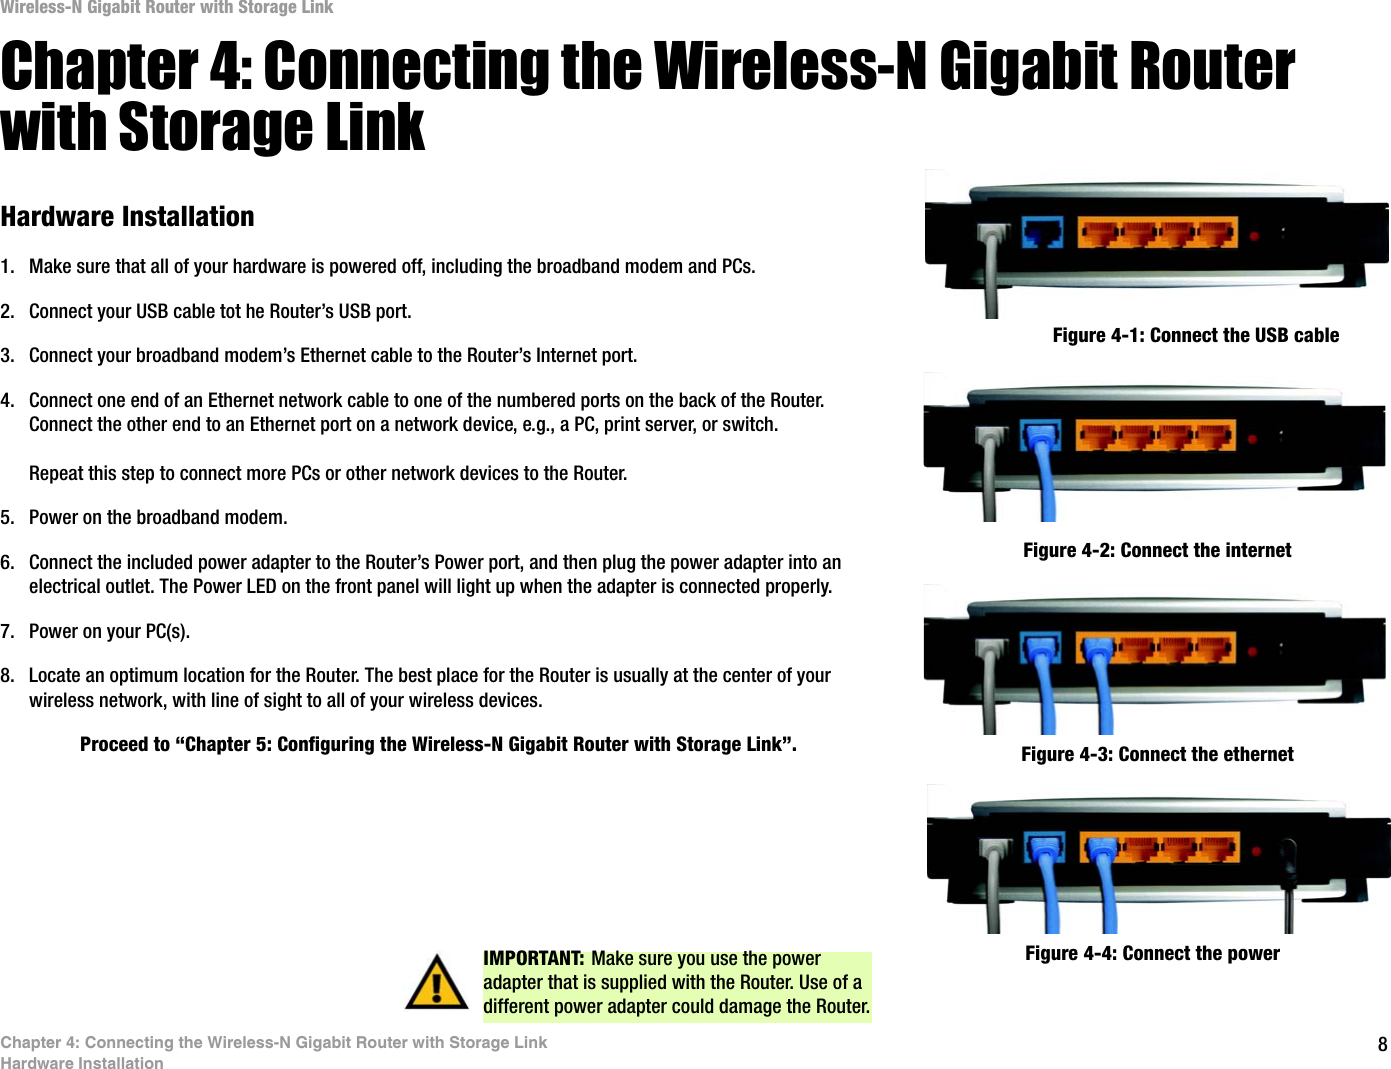 8Chapter 4: Connecting the Wireless-N Gigabit Router with Storage LinkHardware InstallationWireless-N Gigabit Router with Storage LinkChapter 4: Connecting the Wireless-N Gigabit Router with Storage LinkHardware Installation1. Make sure that all of your hardware is powered off, including the broadband modem and PCs.2. Connect your USB cable tot he Router’s USB port.3. Connect your broadband modem’s Ethernet cable to the Router’s Internet port.4. Connect one end of an Ethernet network cable to one of the numbered ports on the back of the Router. Connect the other end to an Ethernet port on a network device, e.g., a PC, print server, or switch.Repeat this step to connect more PCs or other network devices to the Router.5. Power on the broadband modem.6. Connect the included power adapter to the Router’s Power port, and then plug the power adapter into an electrical outlet. The Power LED on the front panel will light up when the adapter is connected properly.7. Power on your PC(s).8. Locate an optimum location for the Router. The best place for the Router is usually at the center of your wireless network, with line of sight to all of your wireless devices.Proceed to “Chapter 5: Configuring the Wireless-N Gigabit Router with Storage Link”.Figure 4-1: Connect the USB cable Figure 4-2: Connect the internetFigure 4-4: Connect the powerIMPORTANT: Make sure you use the power adapter that is supplied with the Router. Use of a different power adapter could damage the Router.Figure 4-3: Connect the ethernet